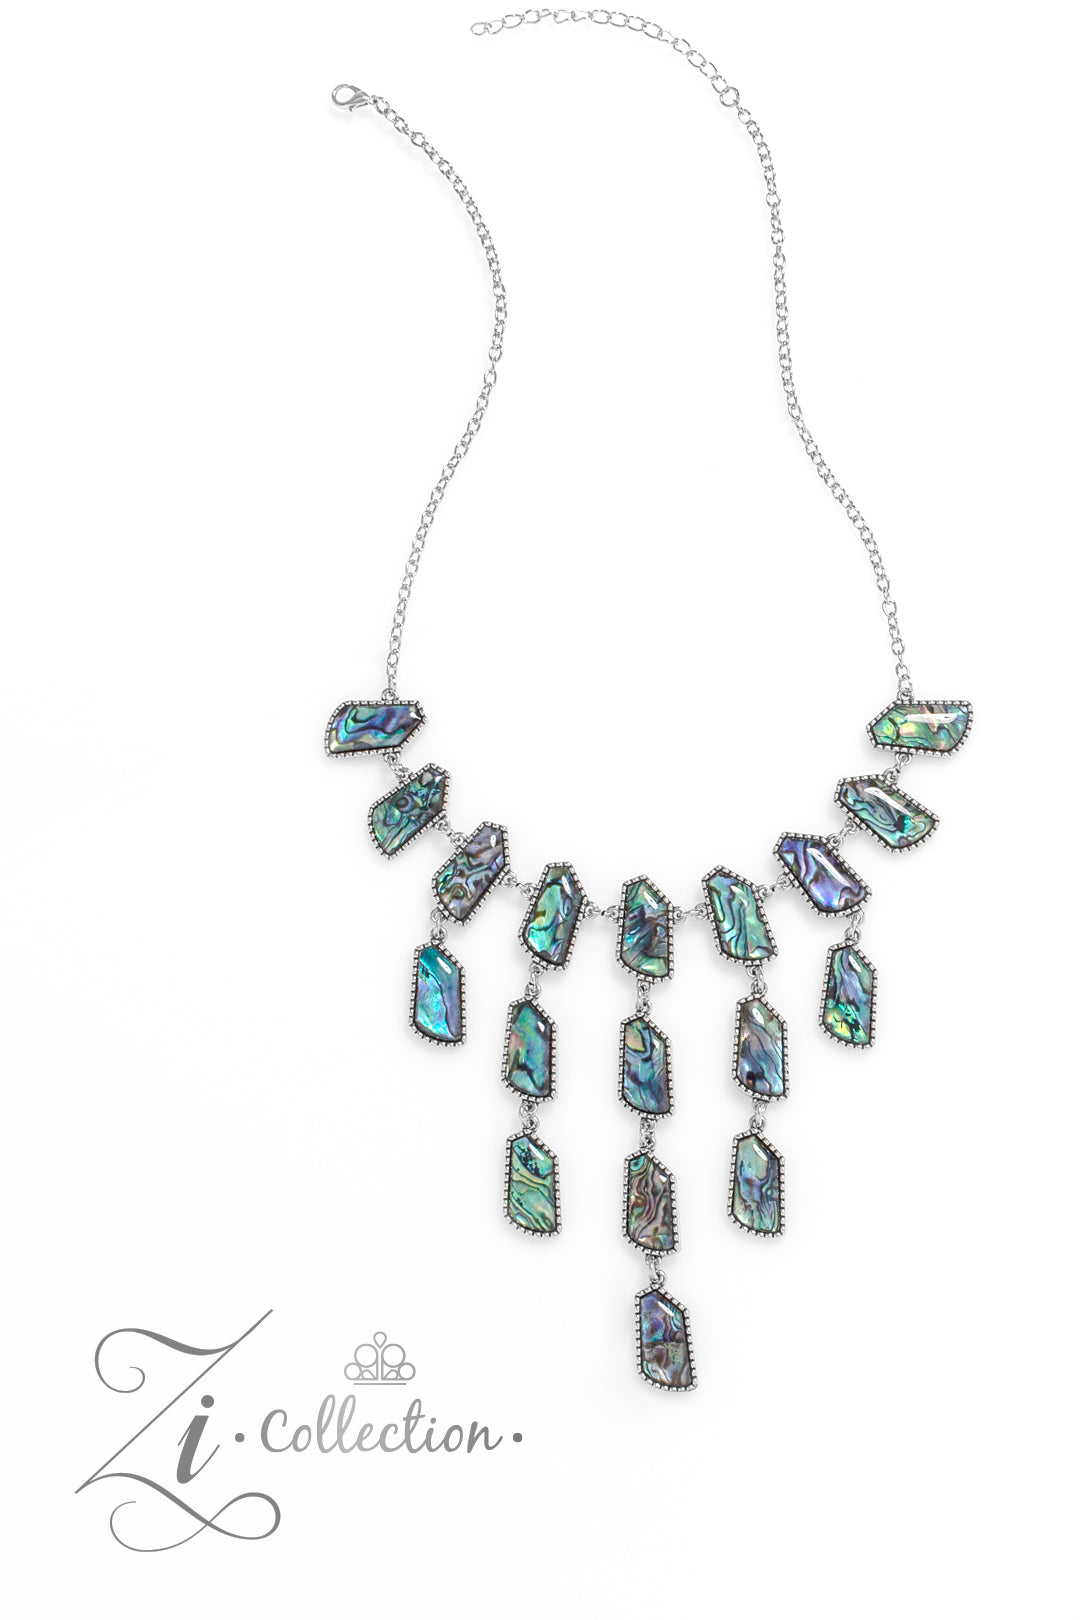 Reverie Multi 2023 Zi Collection Necklace - Paparazzi Accessories  Abalone shells swirled in dreamy, reflective hues of blue, purple, and green are cut into abstract geometric shapes and set into studded silver frames. Silver chain links connect a row of shells that bows along the neckline, anchoring a cascade of pearlescent tassels that taper into a shimmery fringe. Features an adjustable clasp closure. Due to its prismatic palette, color may vary.